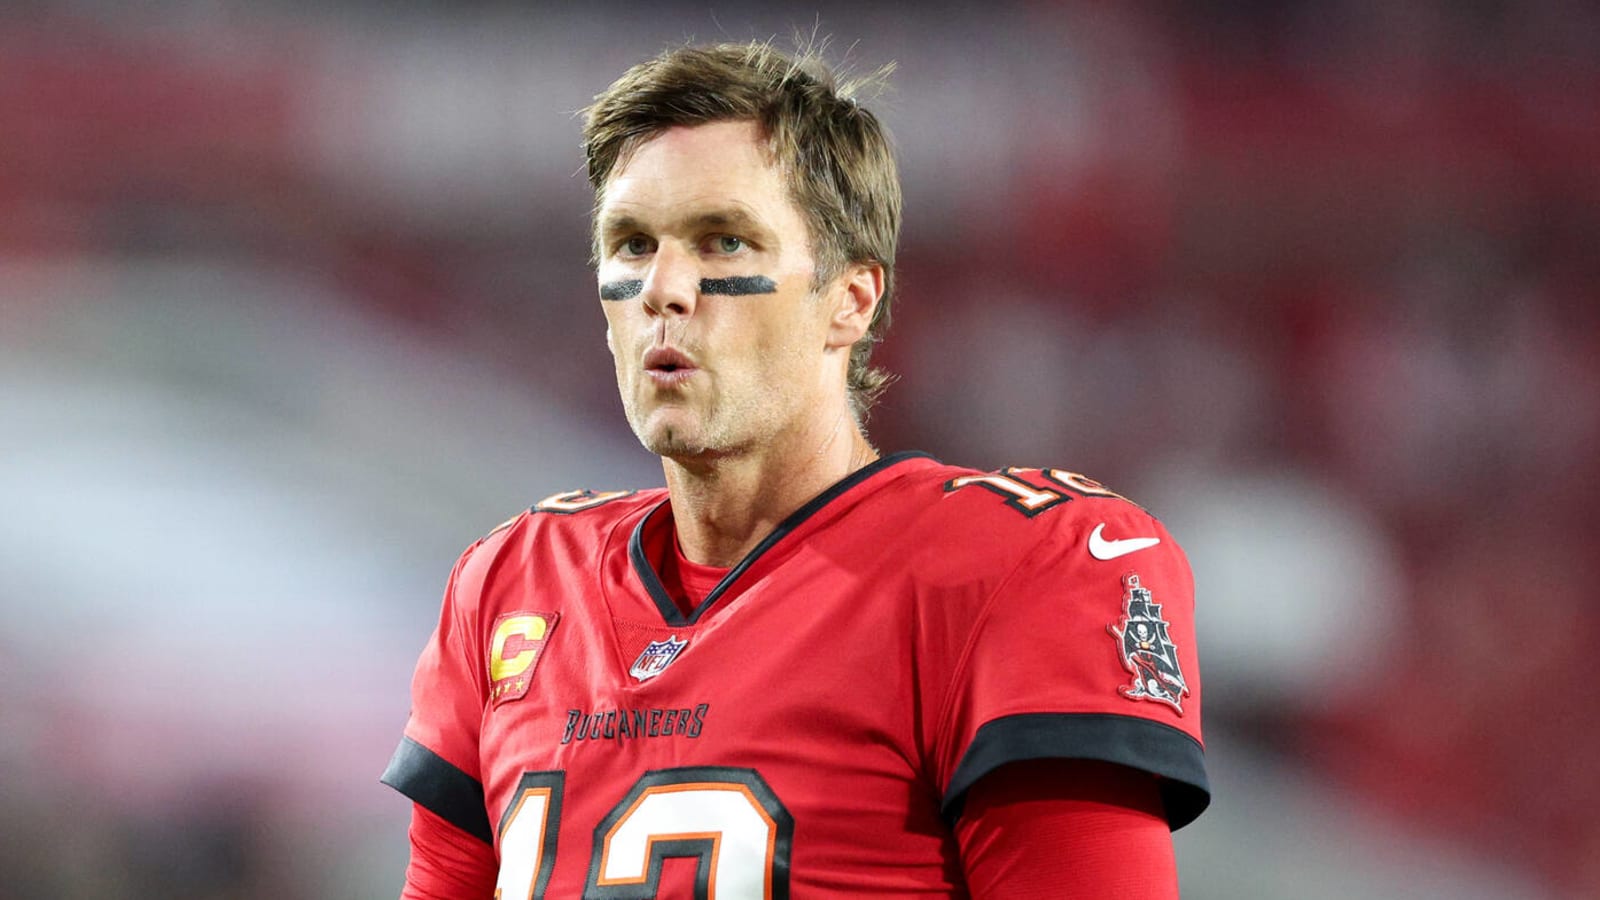 Insider suggests Tom Brady could sign with 49ers for 2023